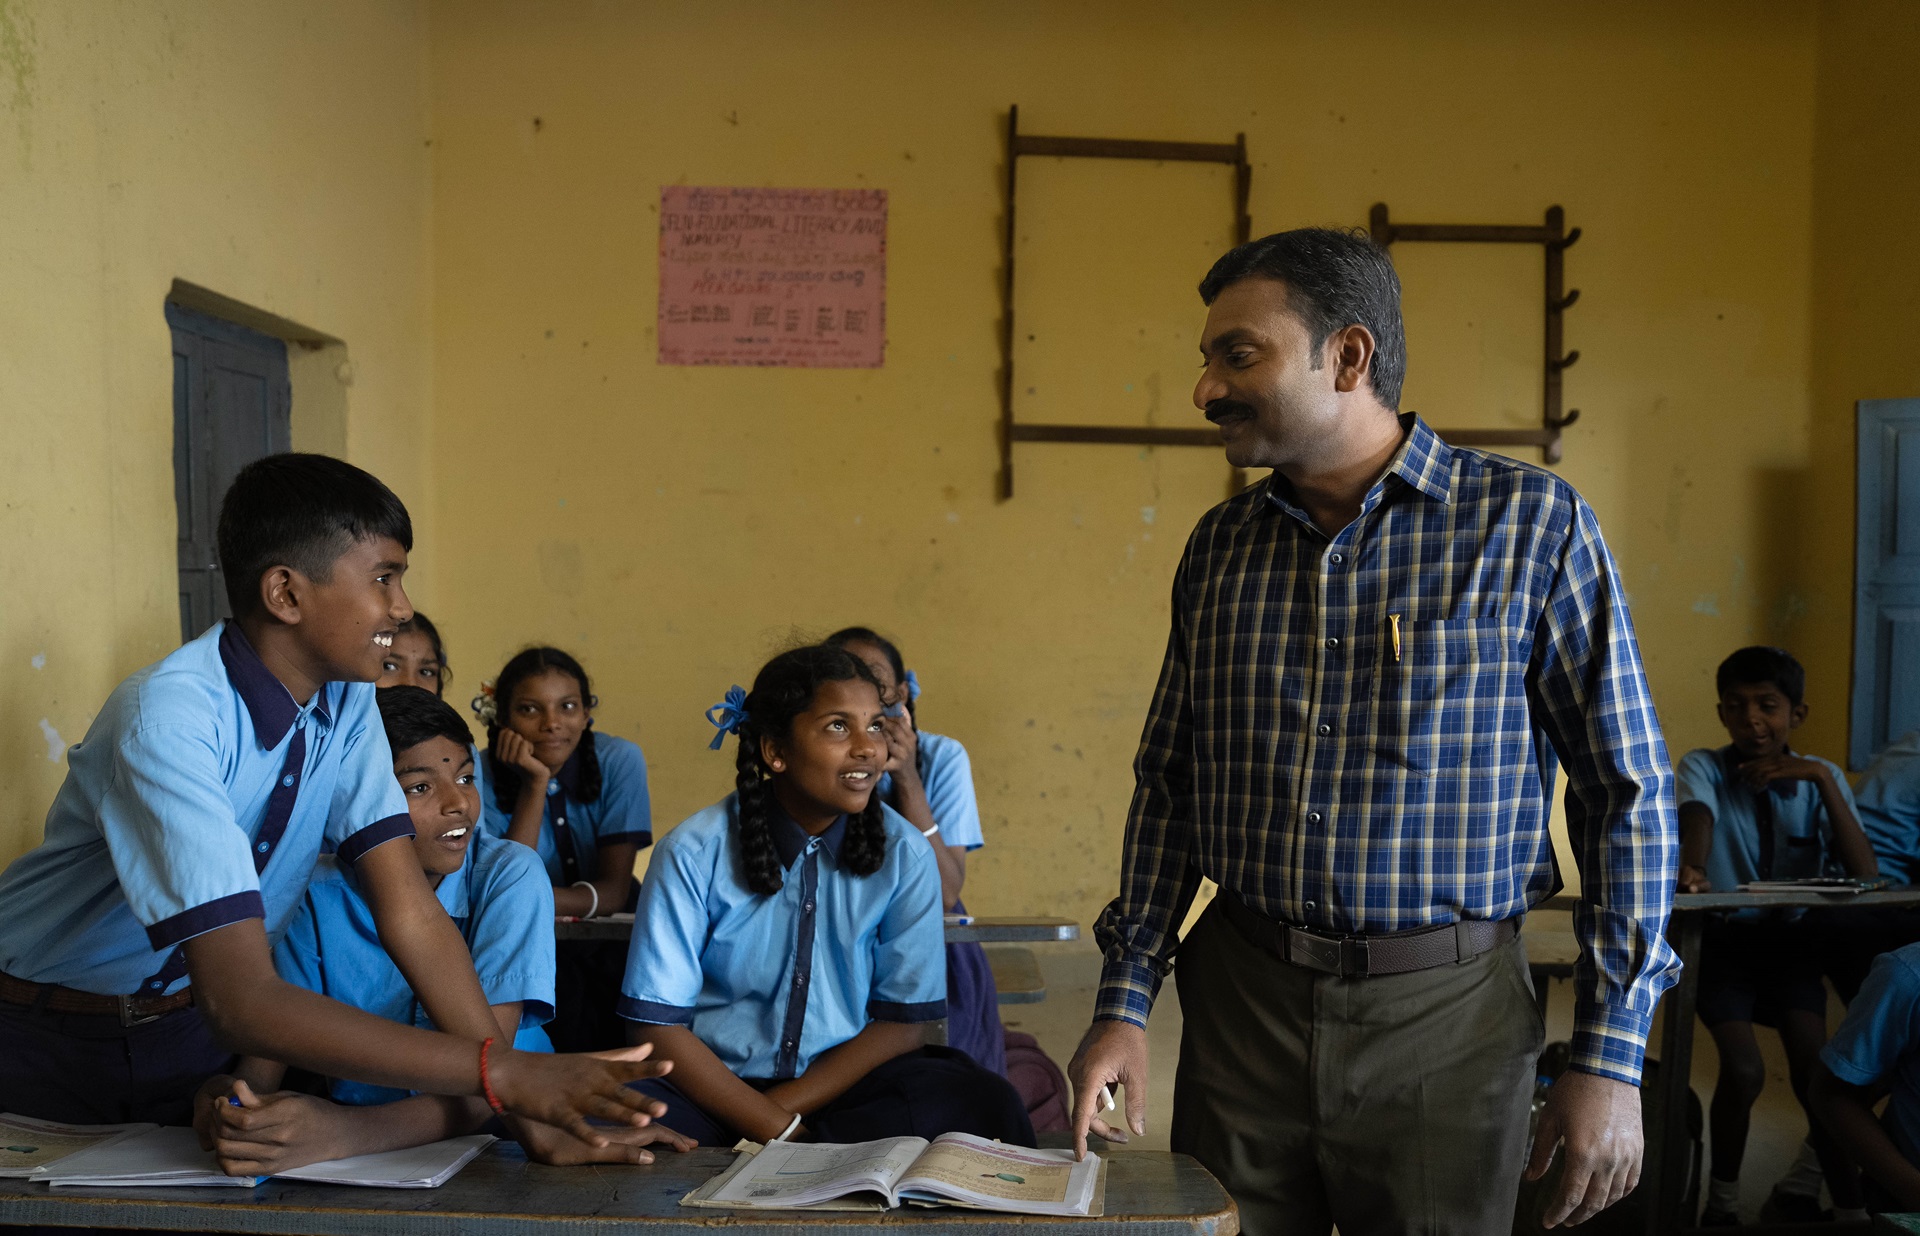 A male teacher in a blue plaid shirt interacting with students in blue uniforms in a classroom